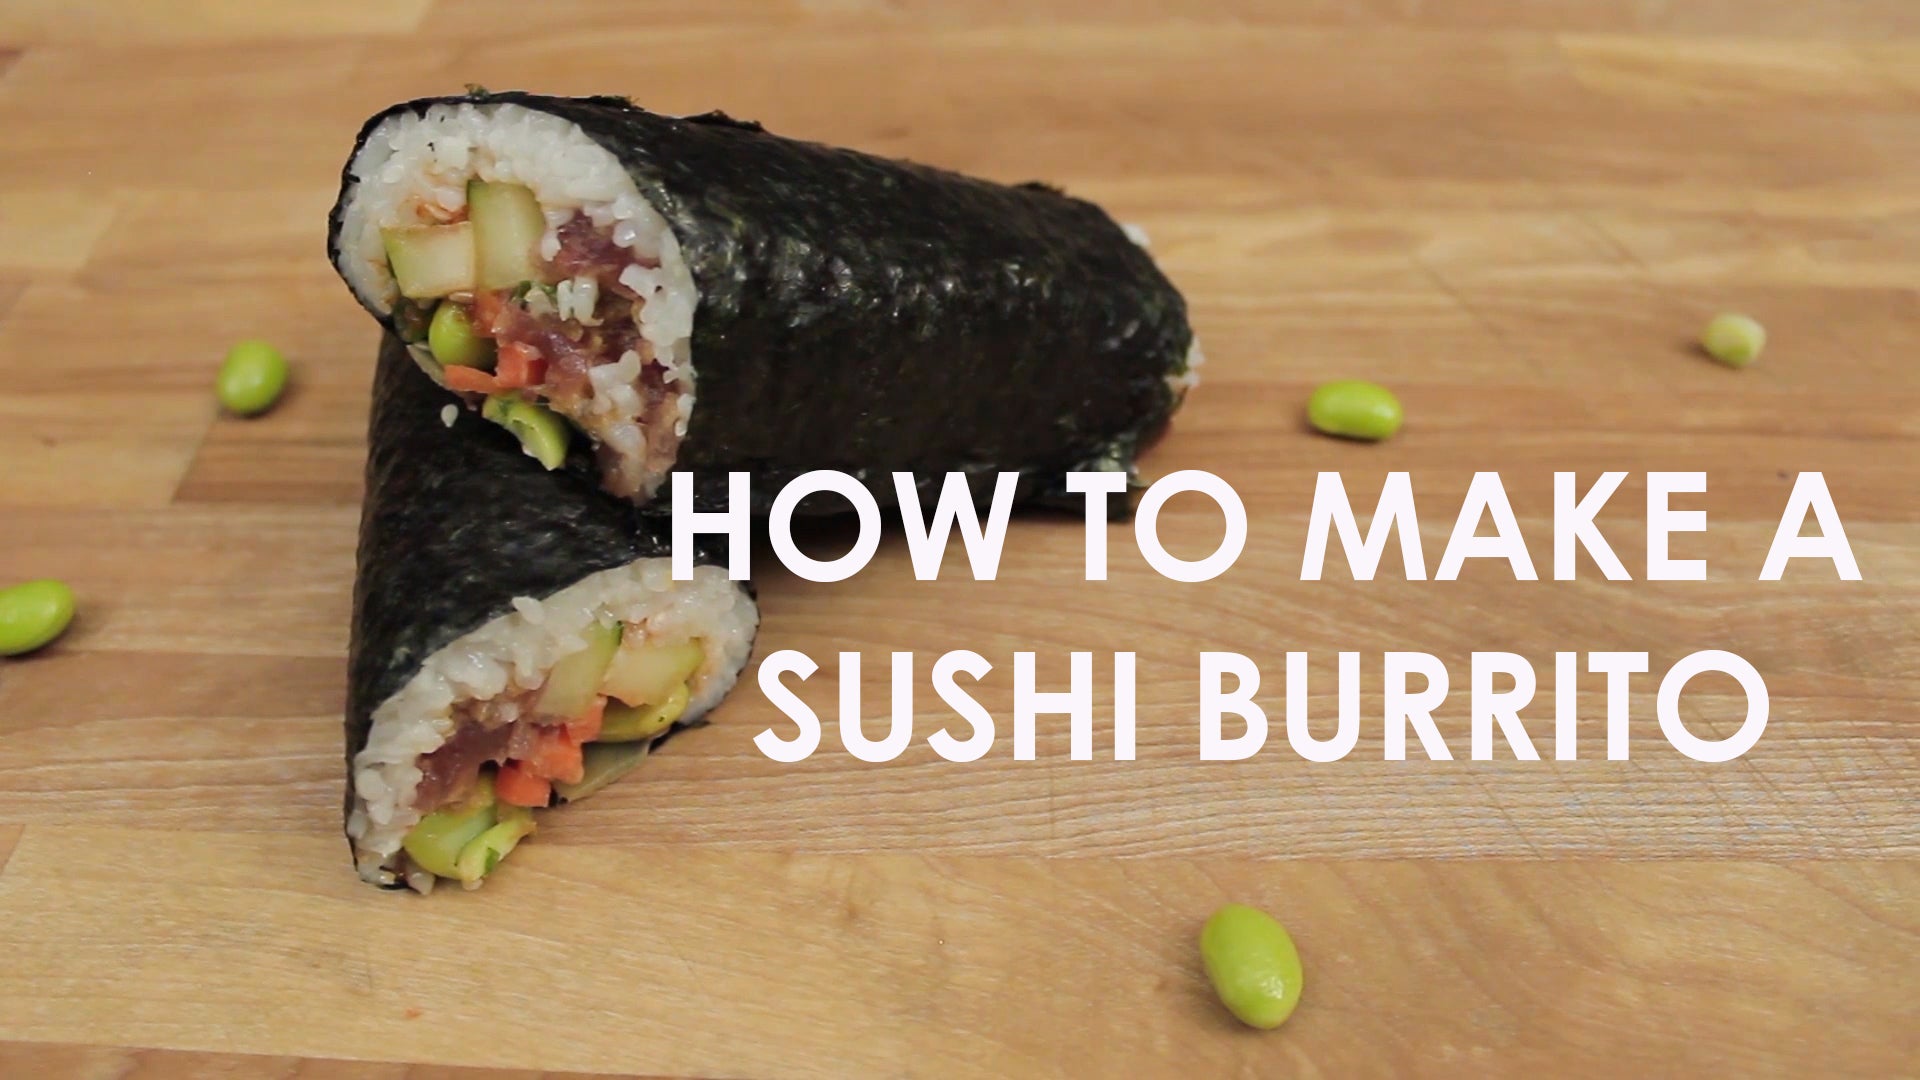 How To Make a Sushi Burrito with a Pressure Cooker